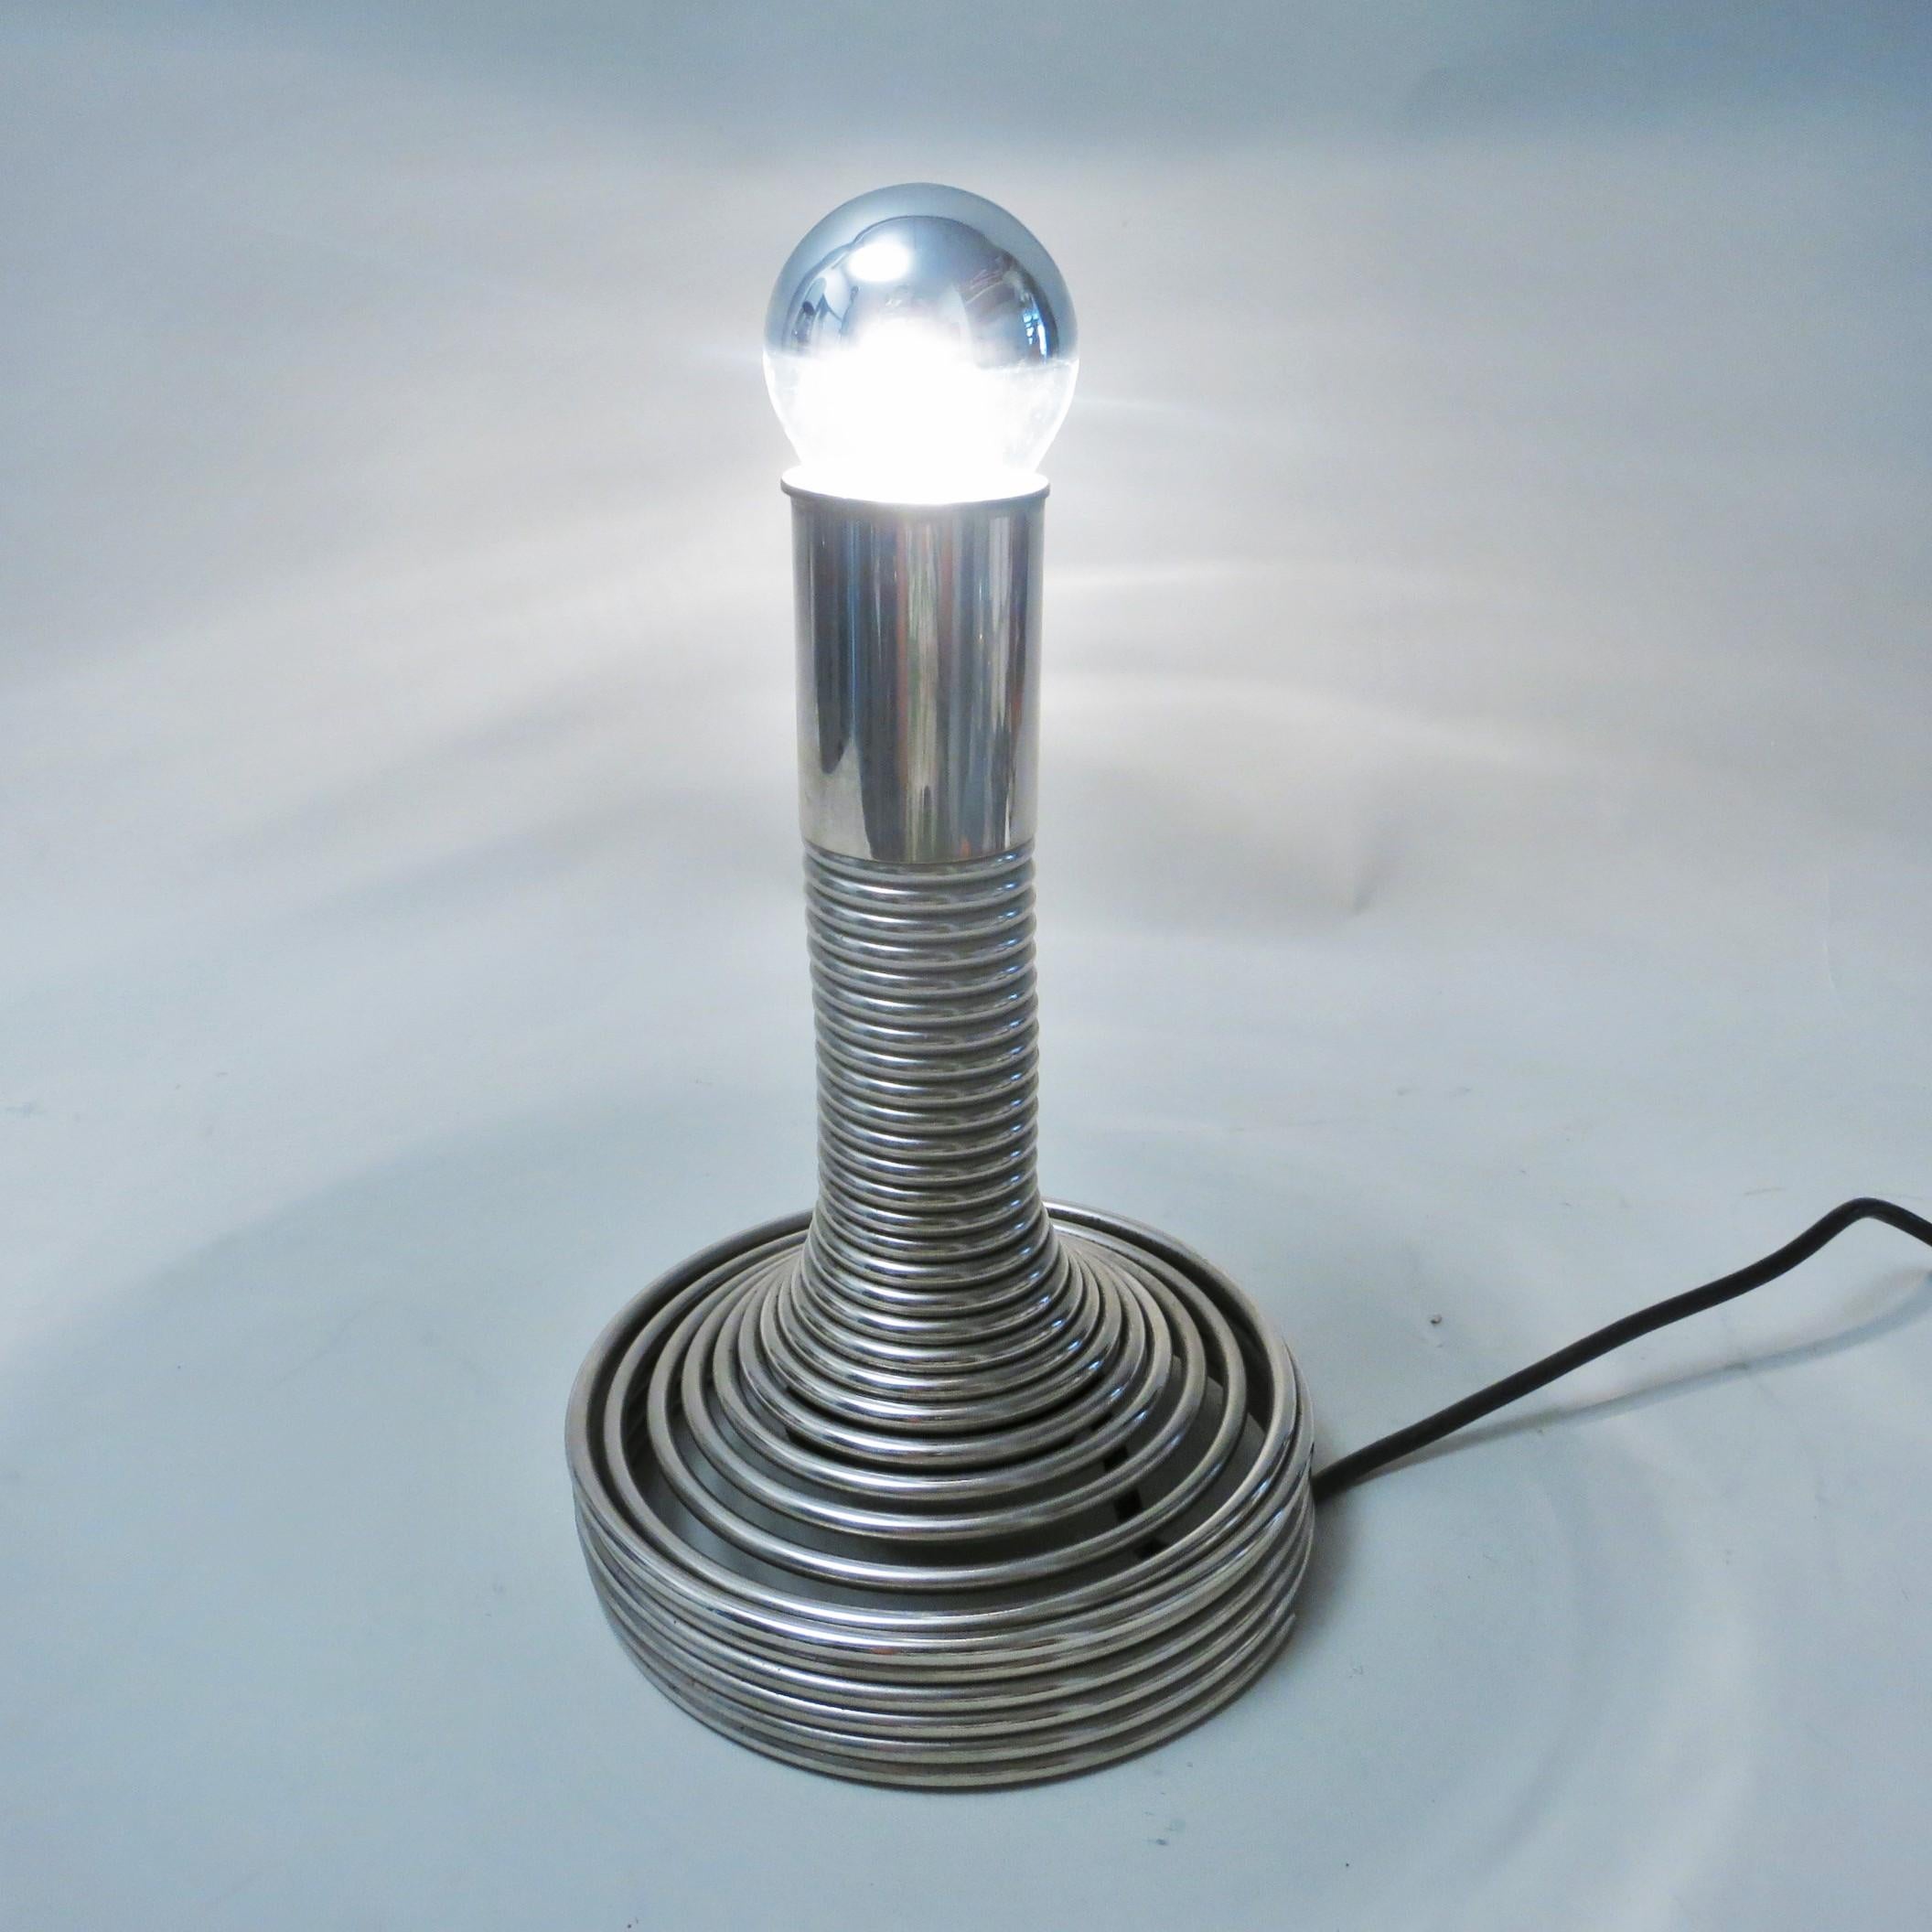 Spirale table lamp designed by Angelo Mangiarotti, Italy, circa 1970 and manufactured by Candle, Milano. The “Spiral” table light is made of a chromed steel spring with a hidden and integrated switch inside the bouncing base.
        